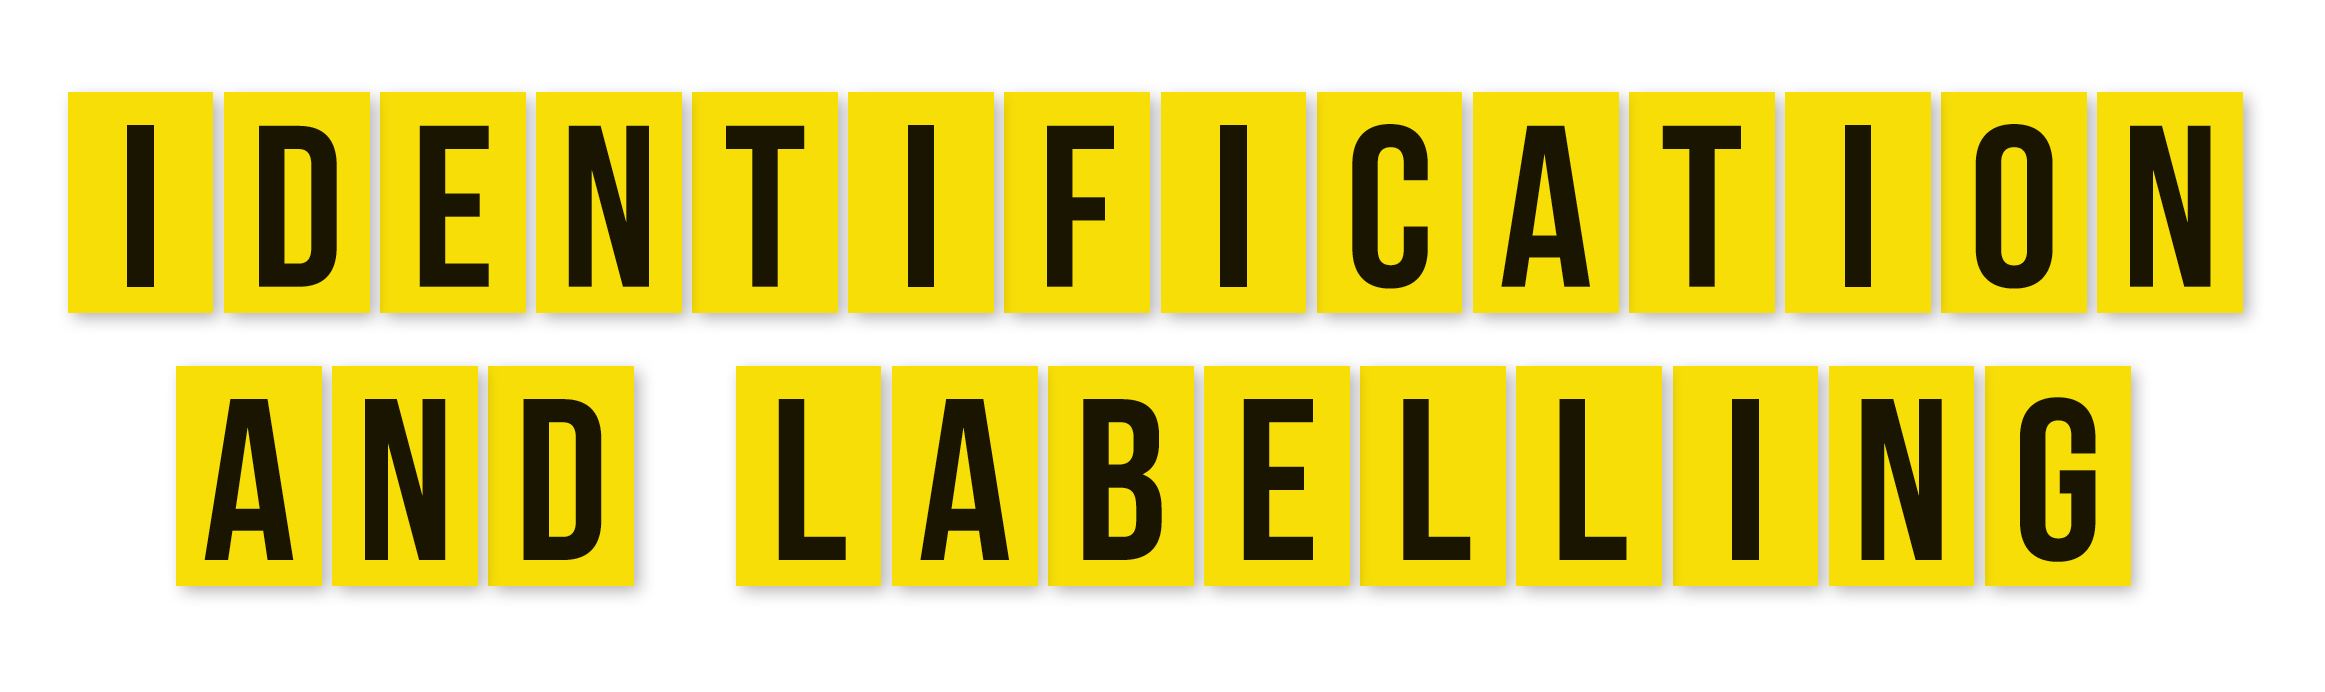 identification-and-labelling